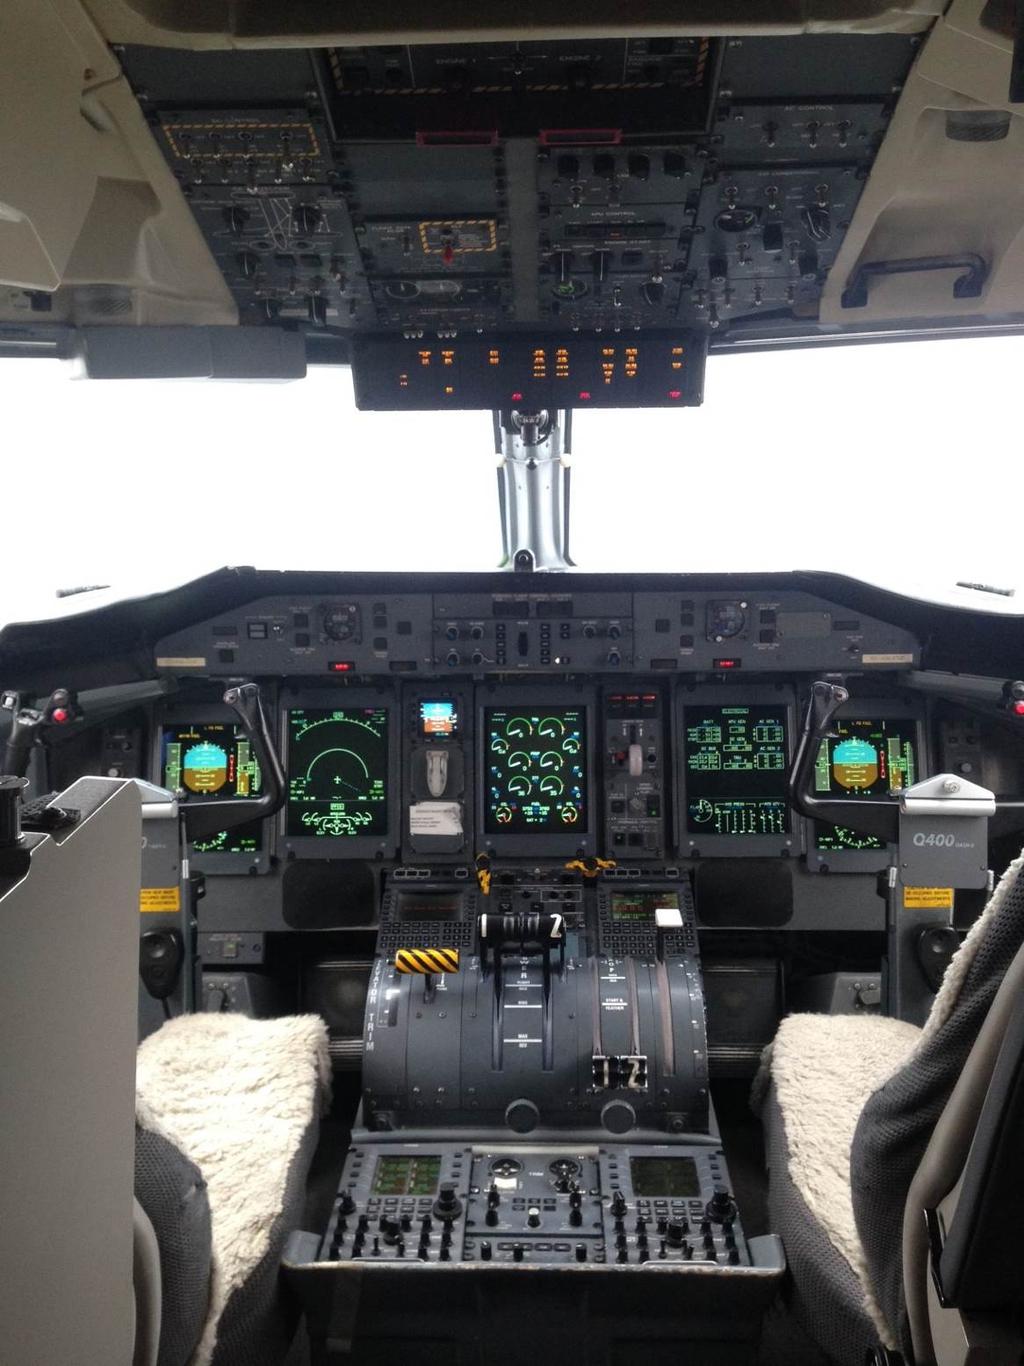 Q400 Serial Number 4048 Available for Sale Flight Compartment Dual FMS with GPS, Dual AHRS IMPORTANT: The equipment specifications set forth herein are based on information provided by the last